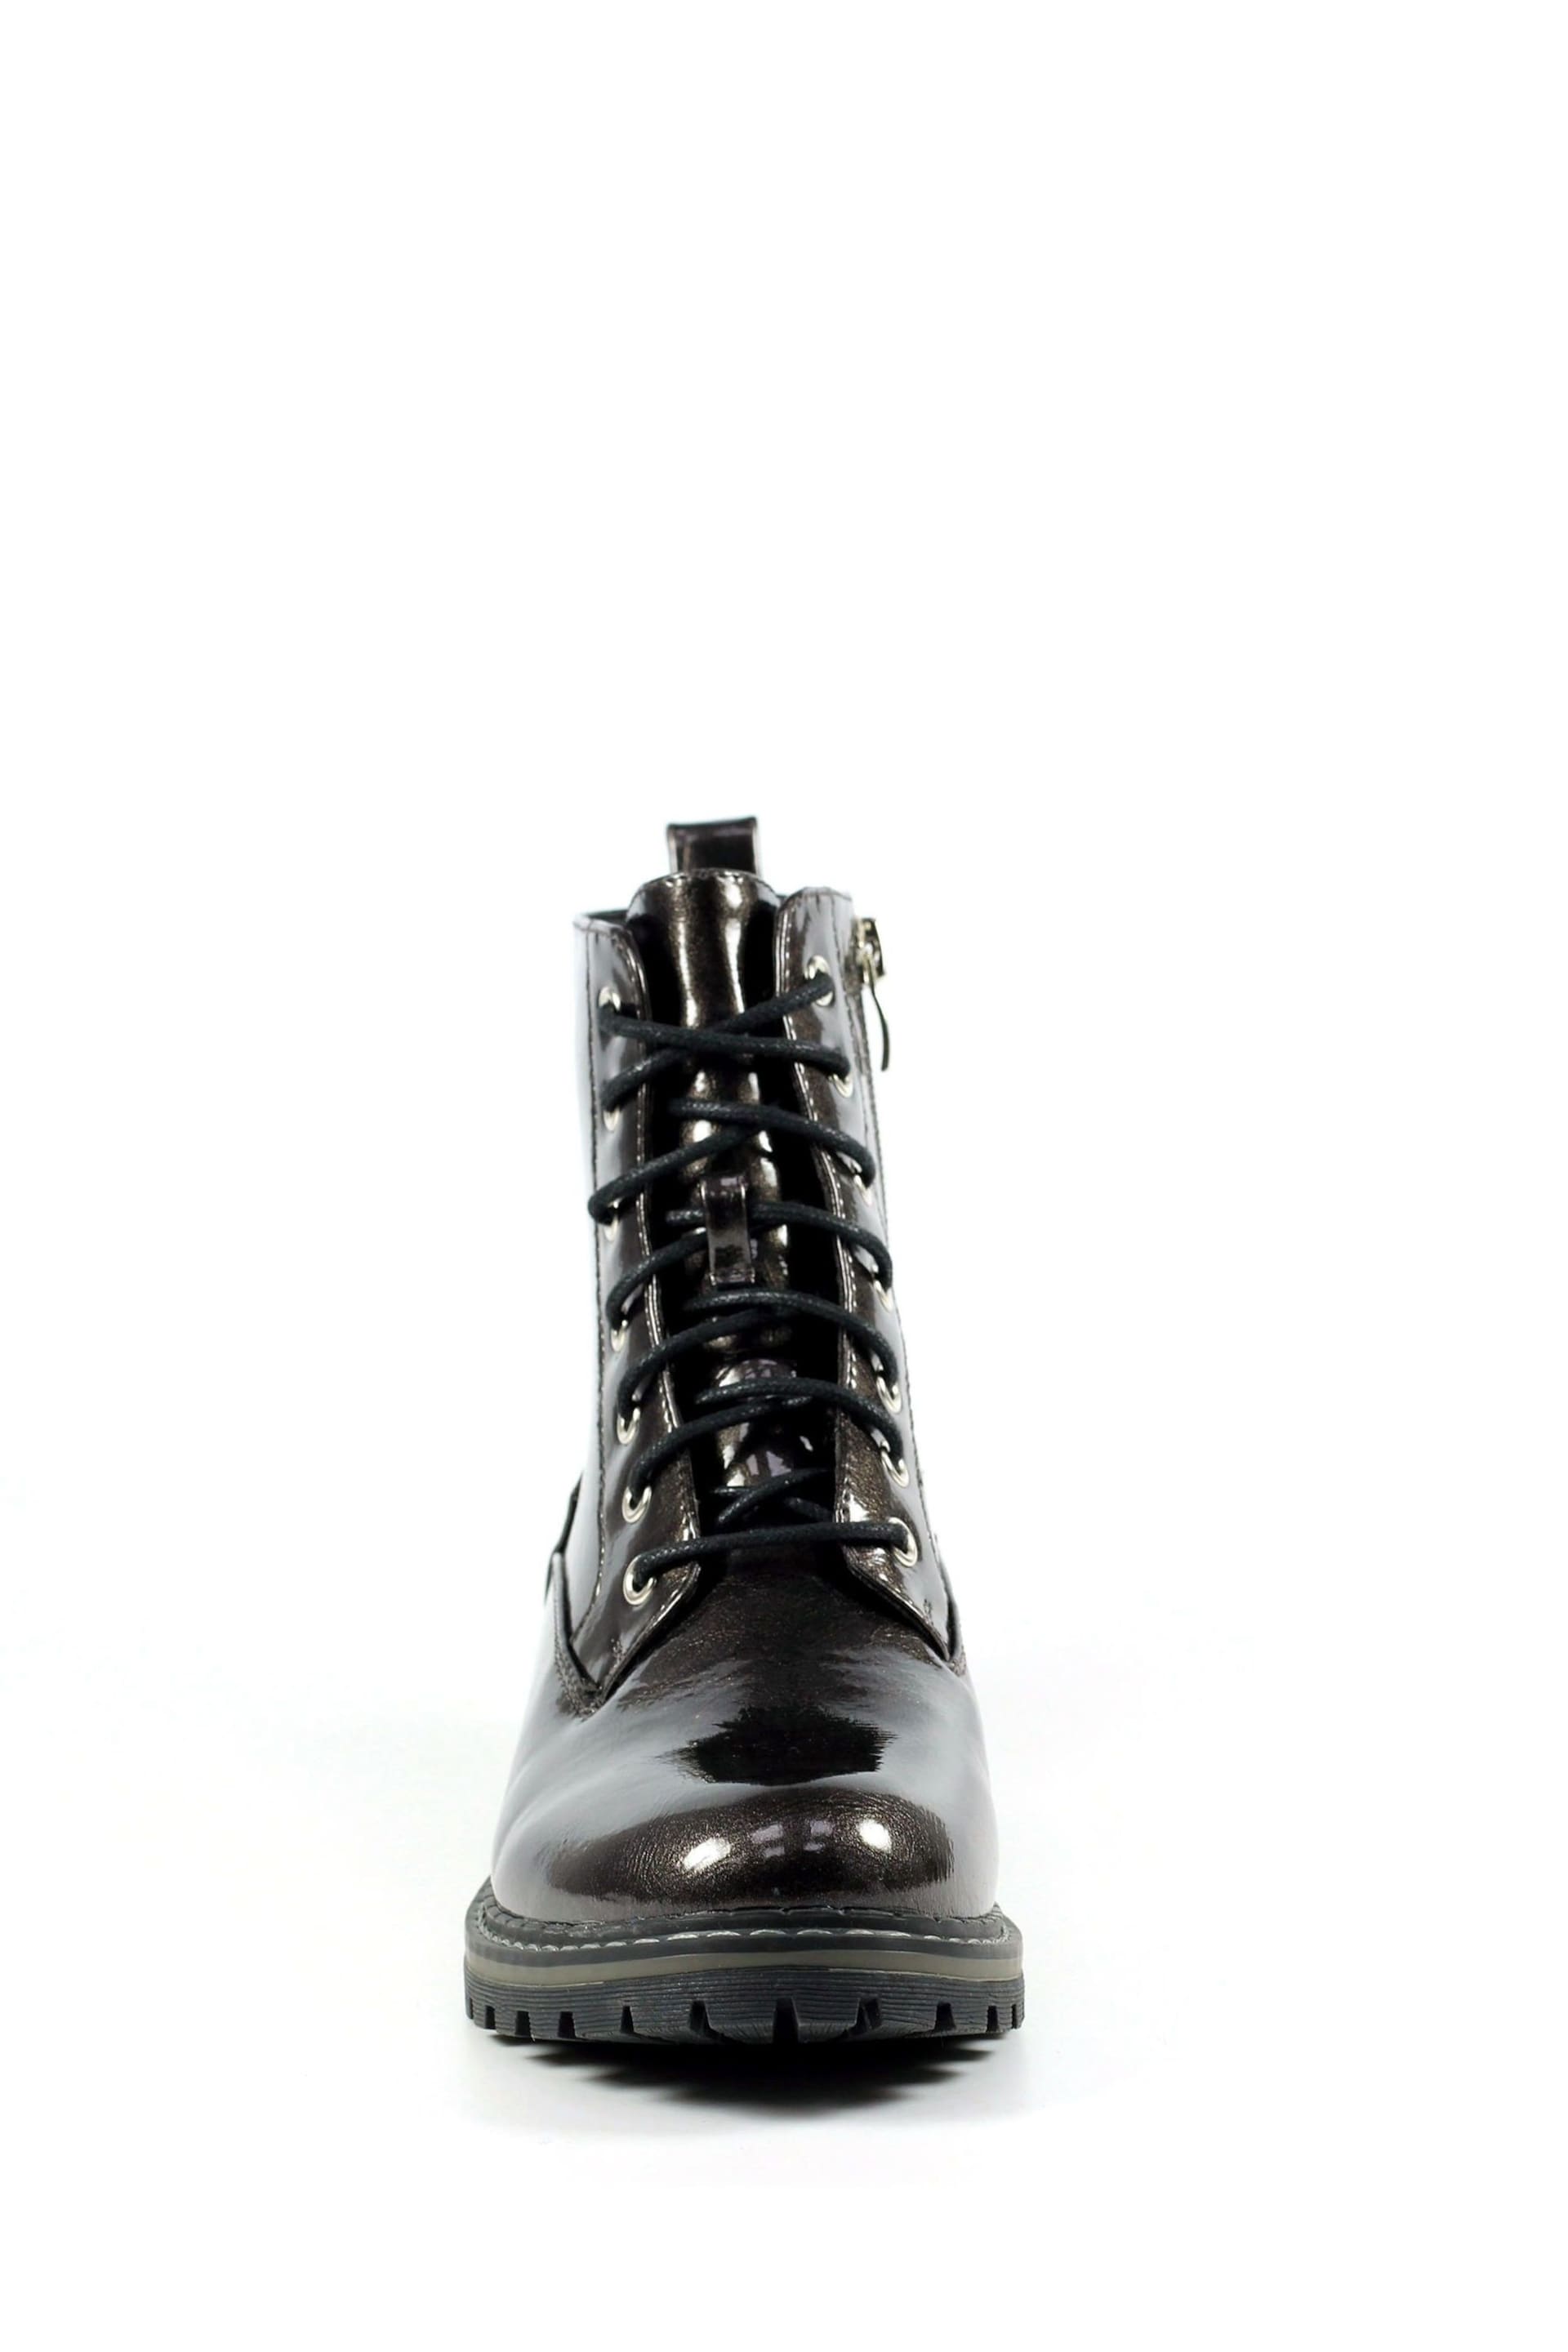 Lunar Nala Ankle Boots - Image 5 of 8